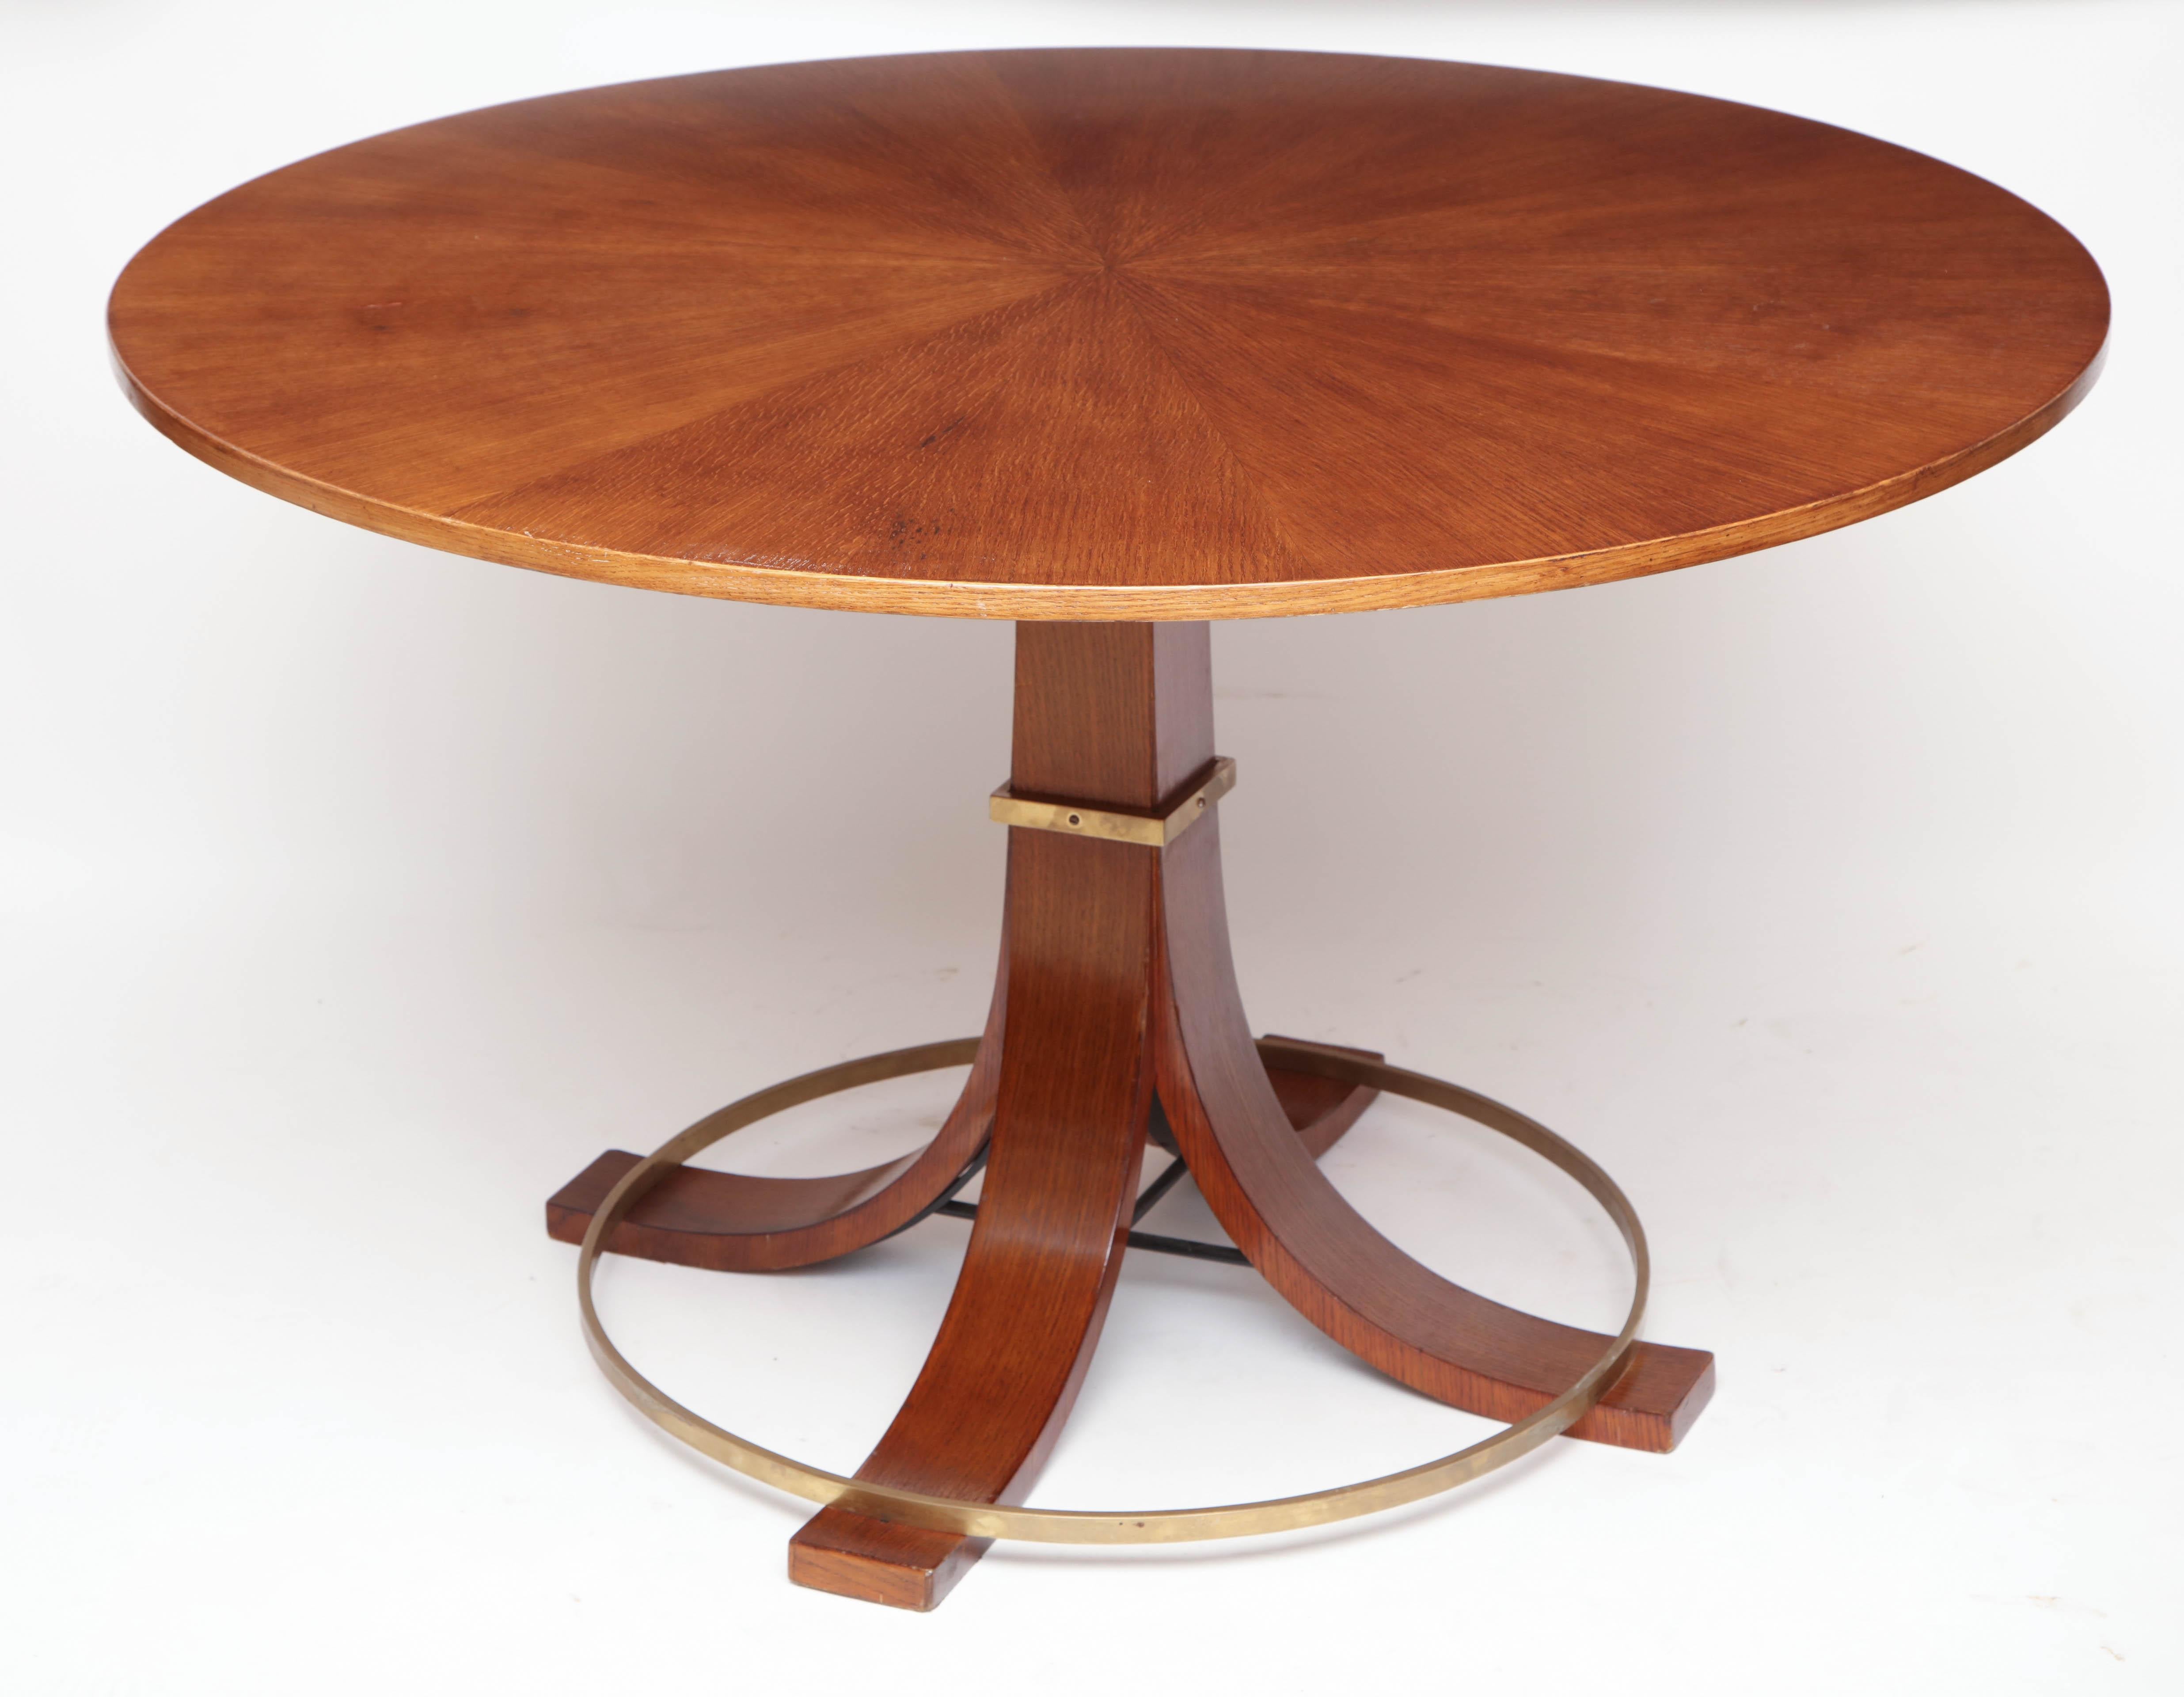 Italian Midcentury Circular Centre Table with Brass Stretcher, circa 1950 For Sale 6